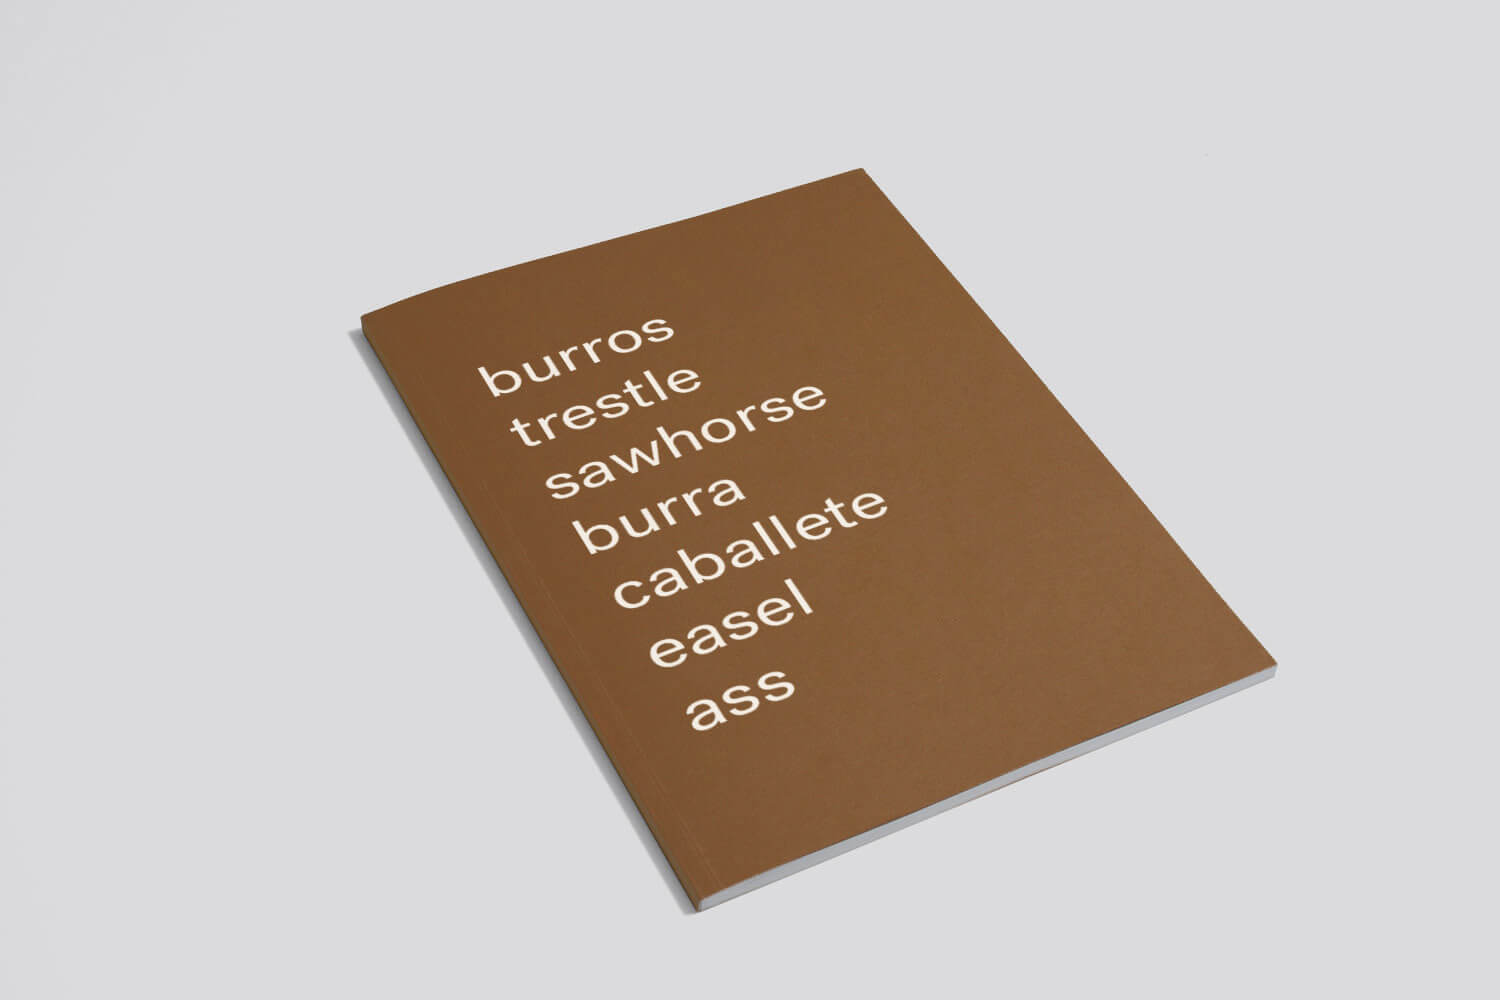 booklet with text "burros, trestle, sawhorse, burra, caballete, easel, ass"